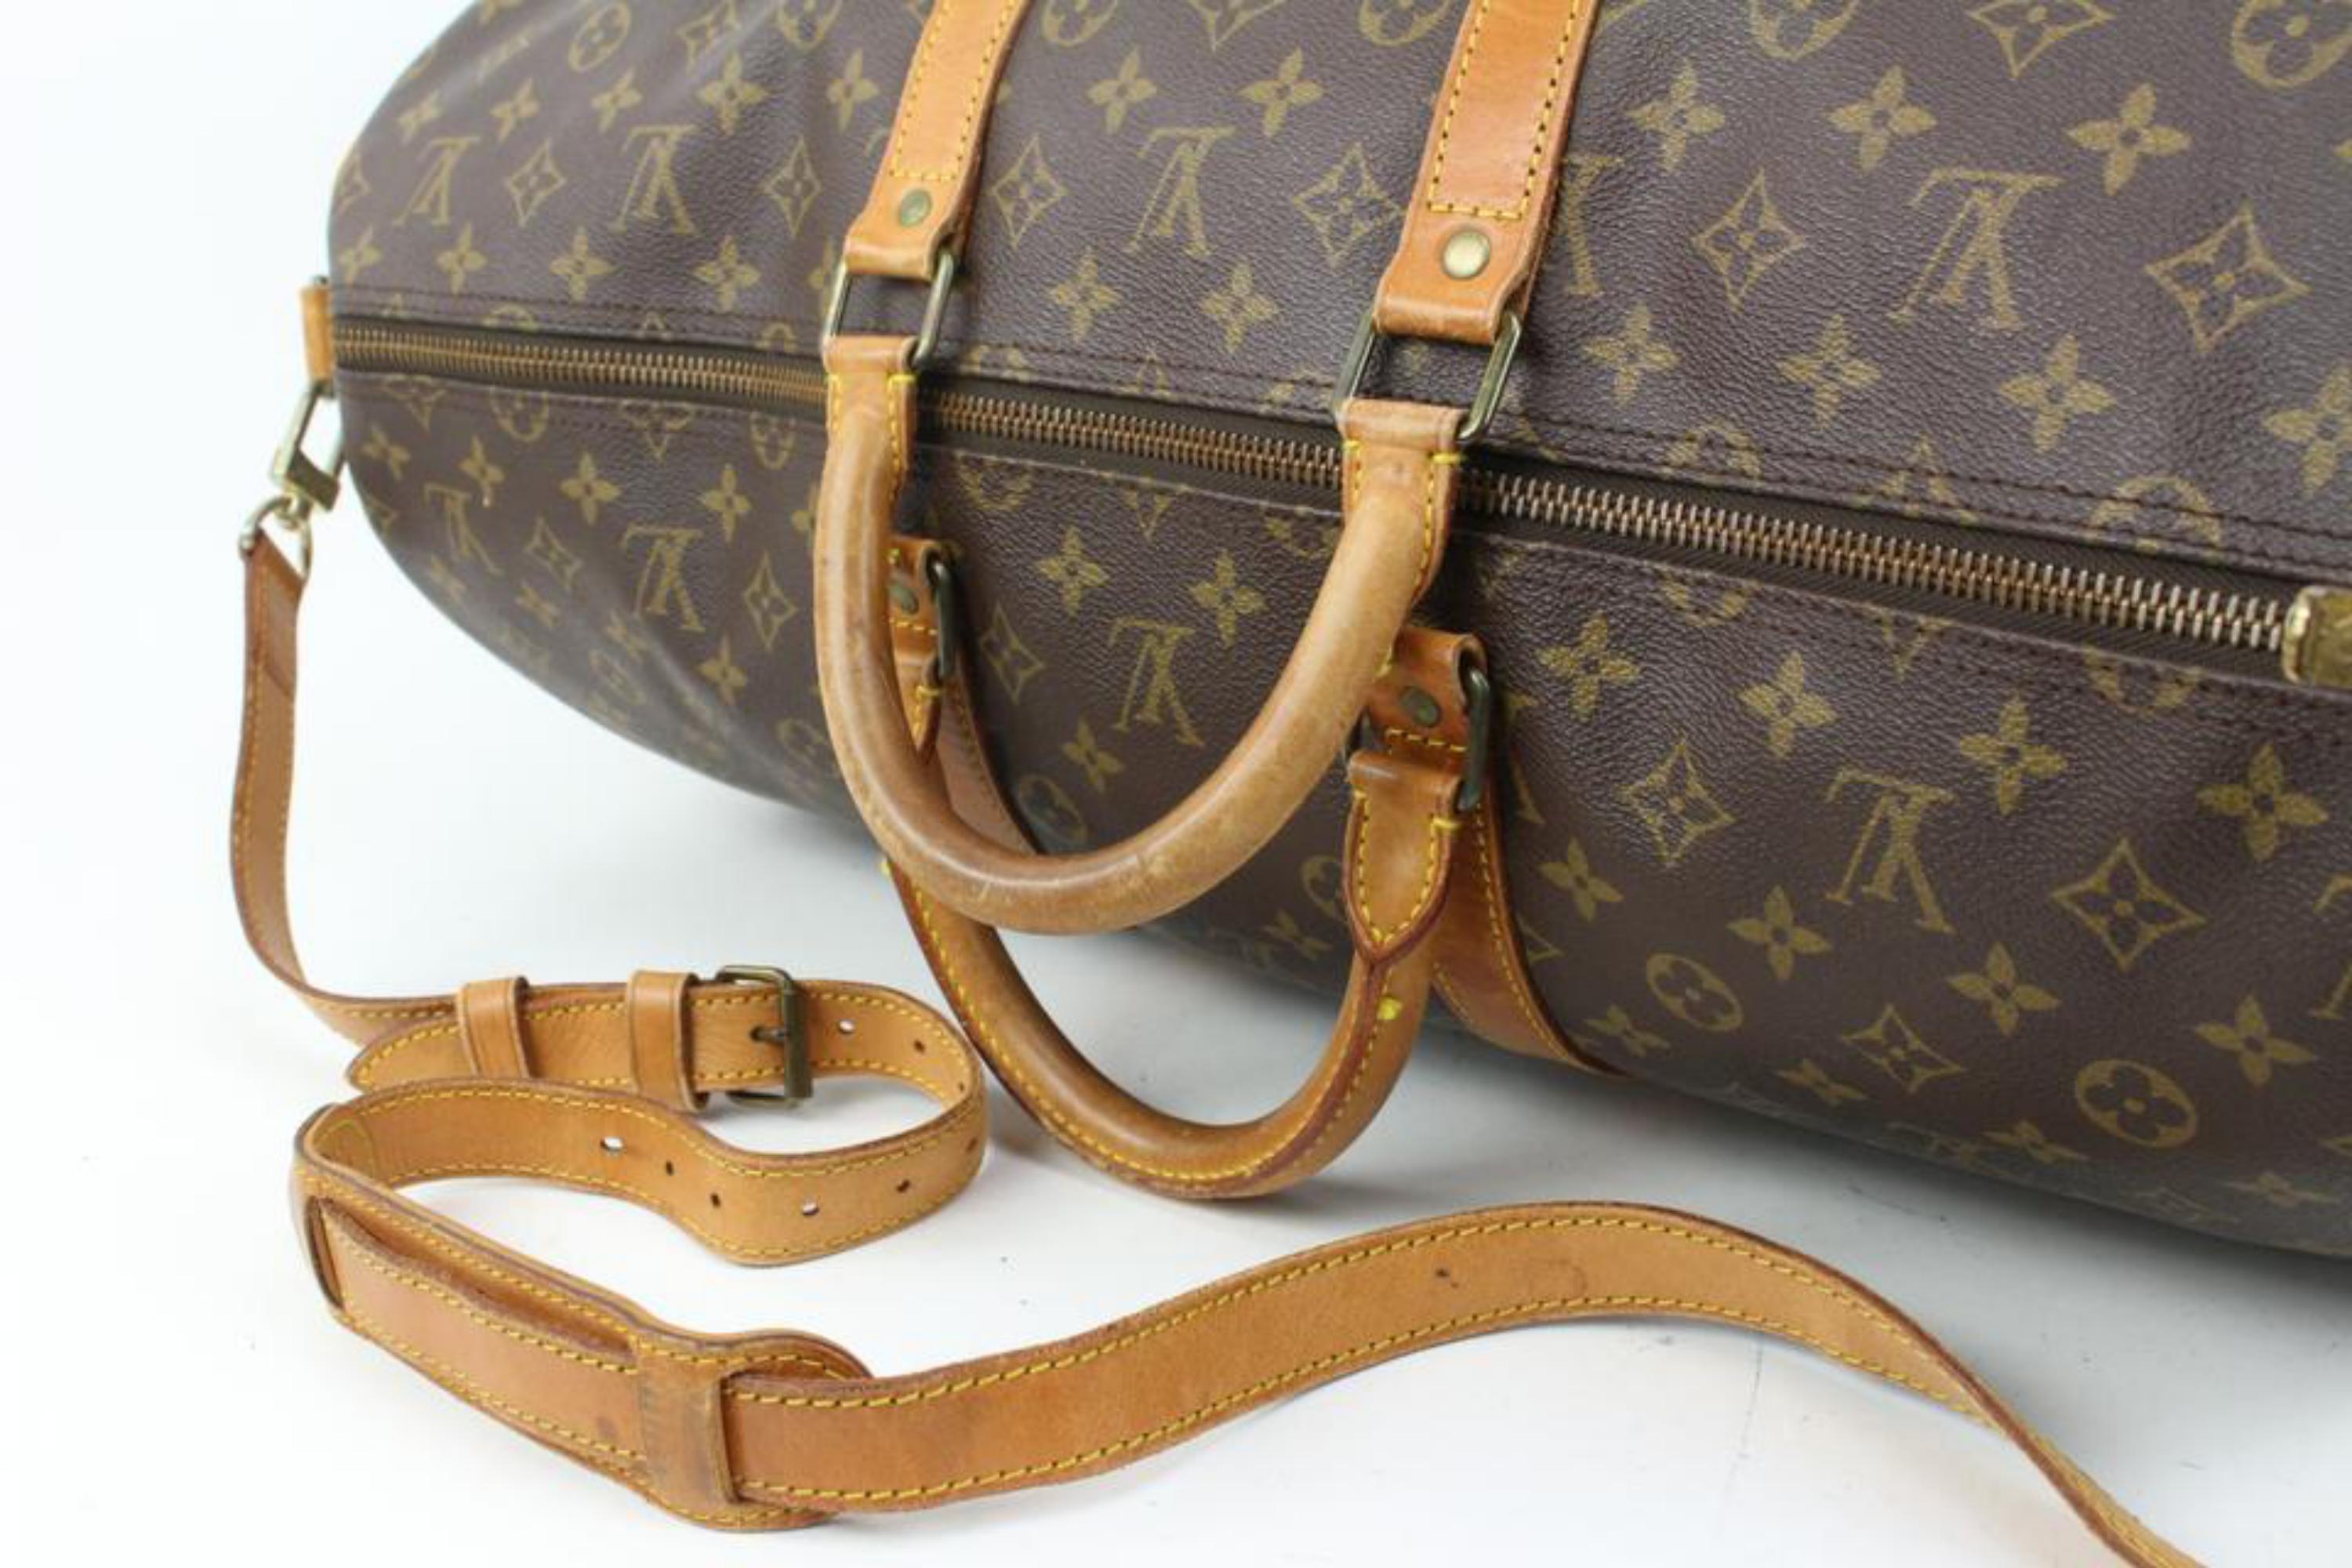 Louis Vuitton Monogram Keepall Bandouliere 55 Boston Duffle Bag 81lz422s In Good Condition For Sale In Dix hills, NY